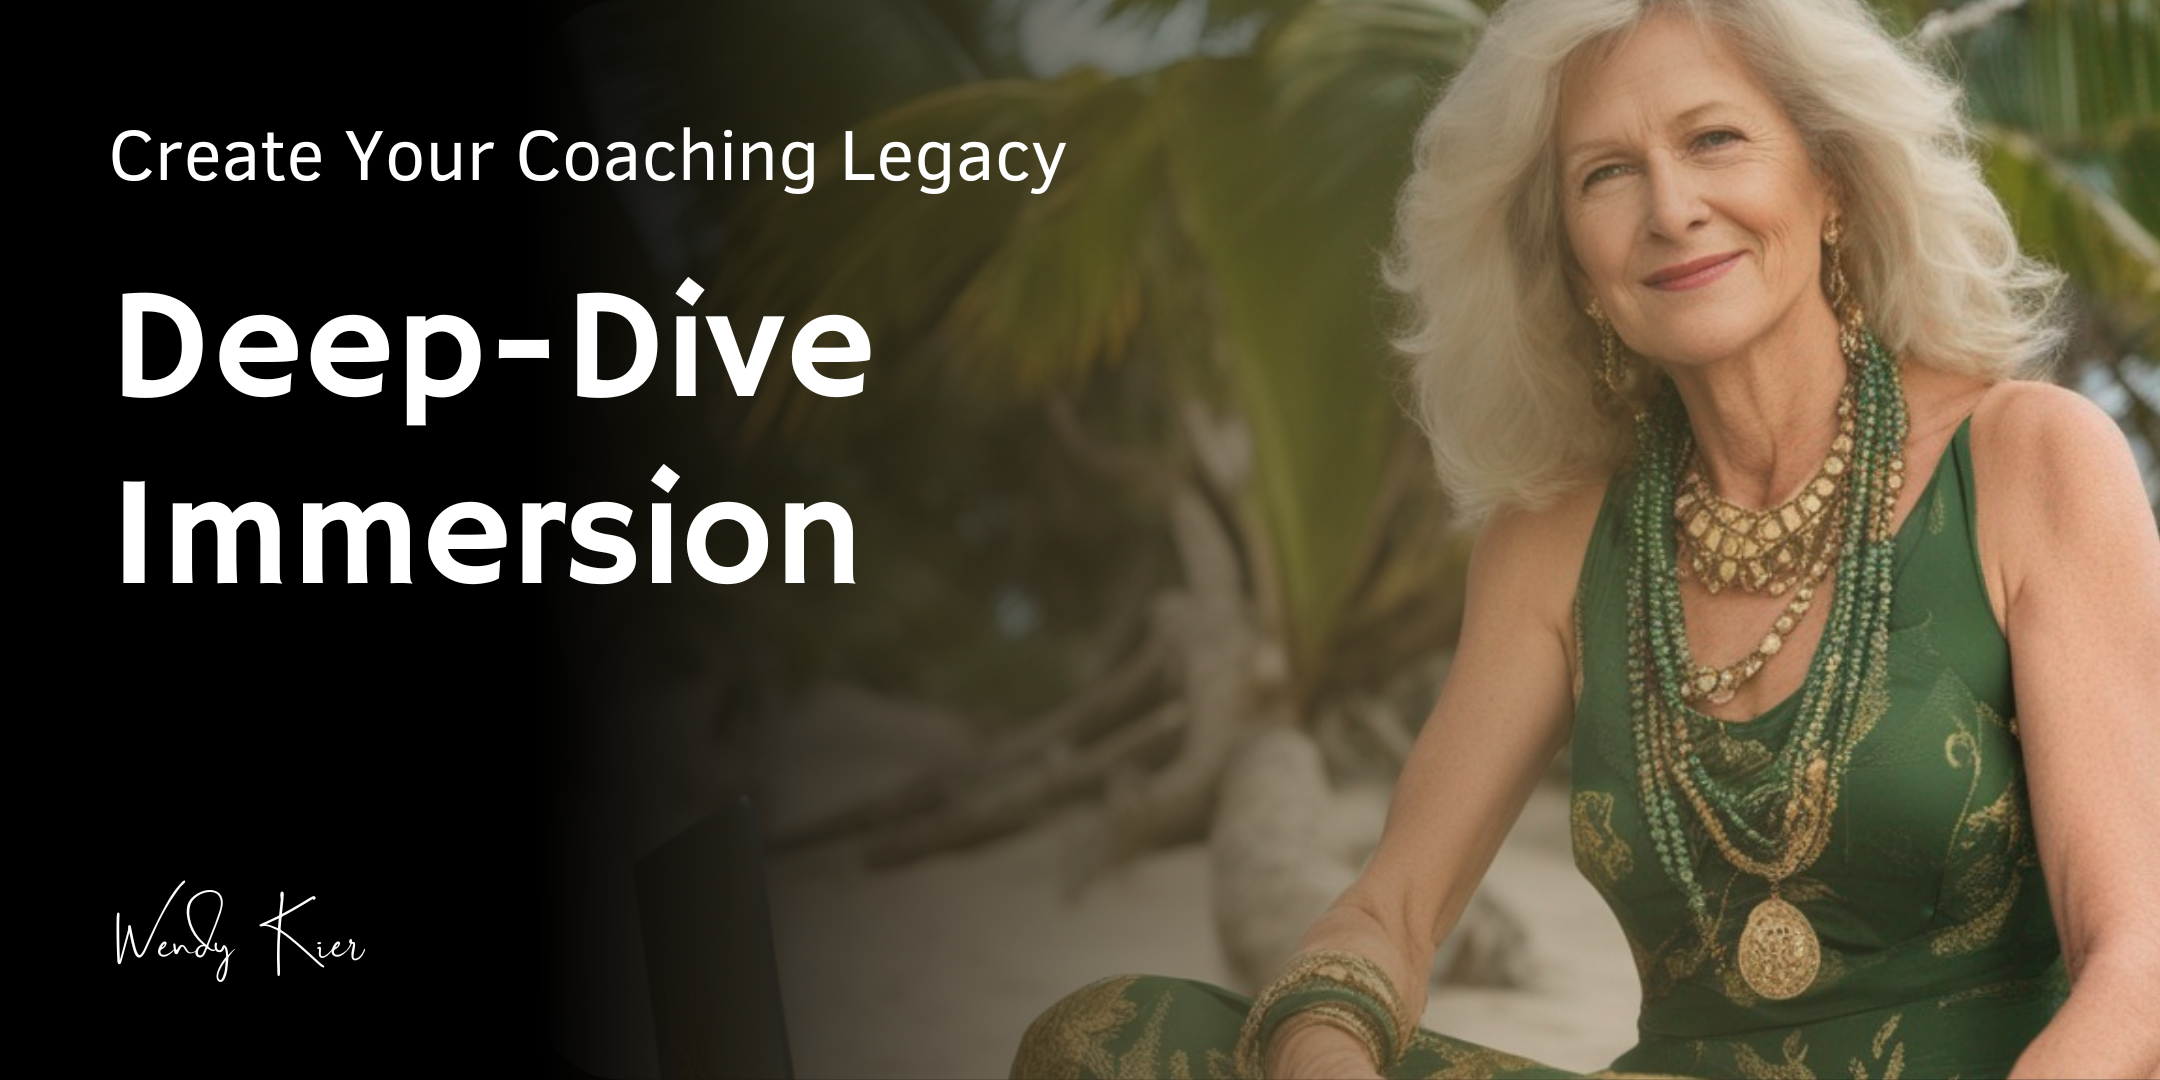 women 45+ Create Your Coaching Legacy Deep-Dive Immersion